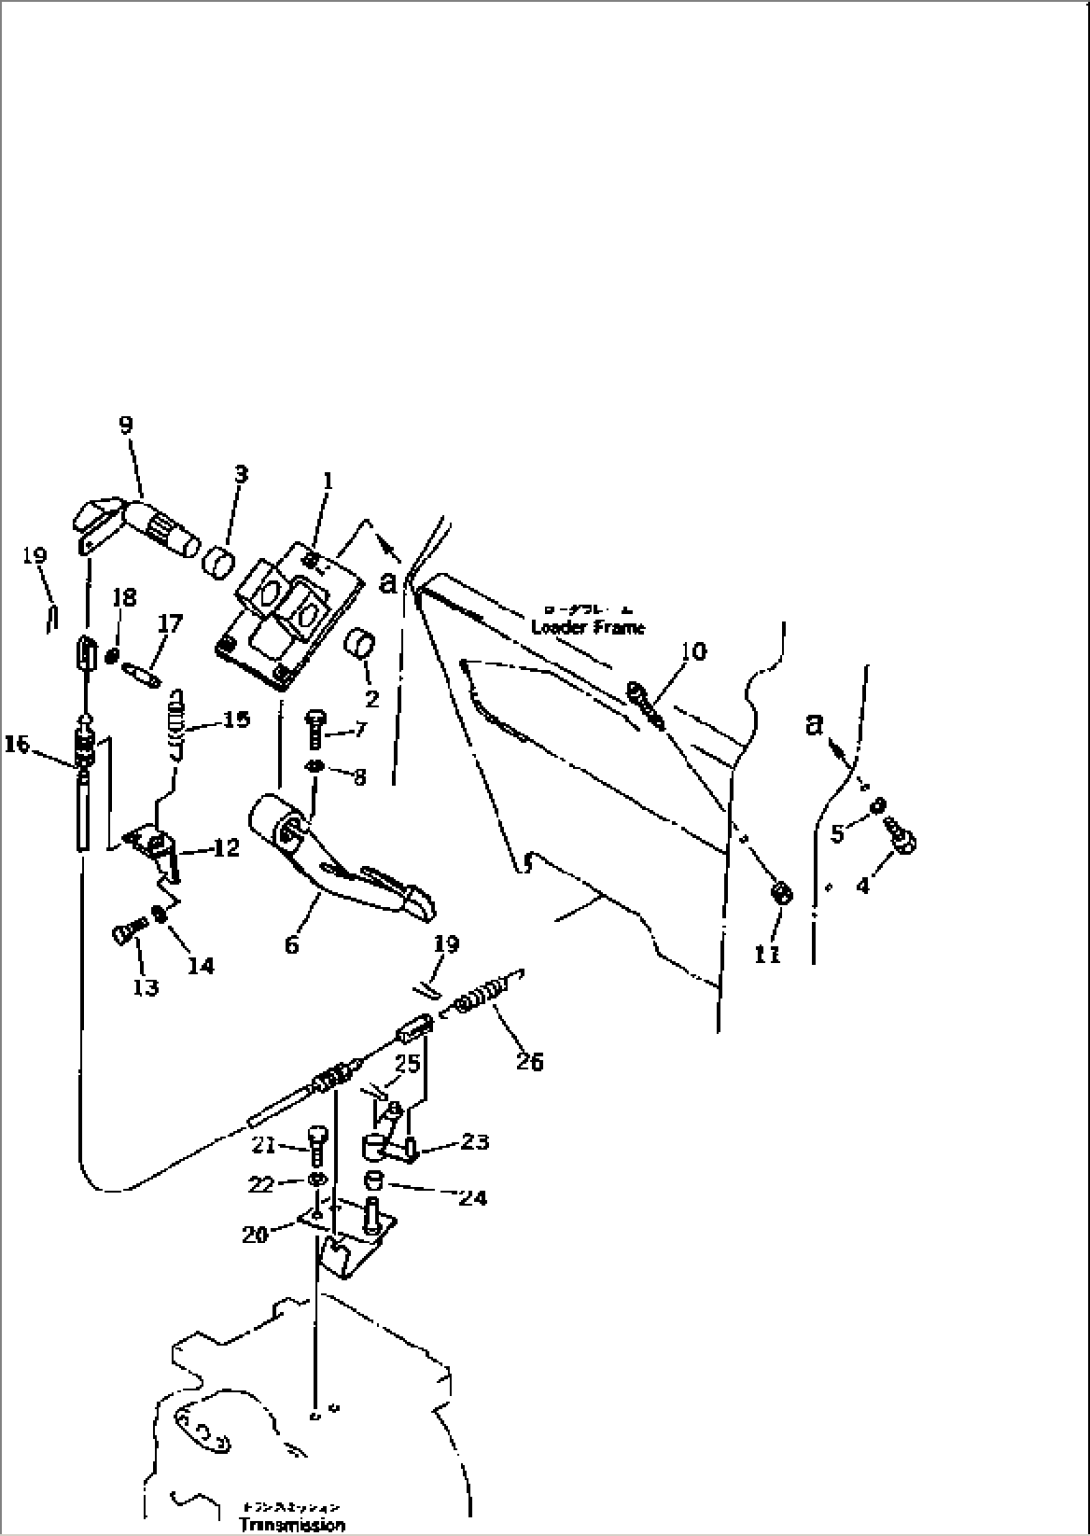 INCHING PEDAL (FOR PEDAL STEERING)